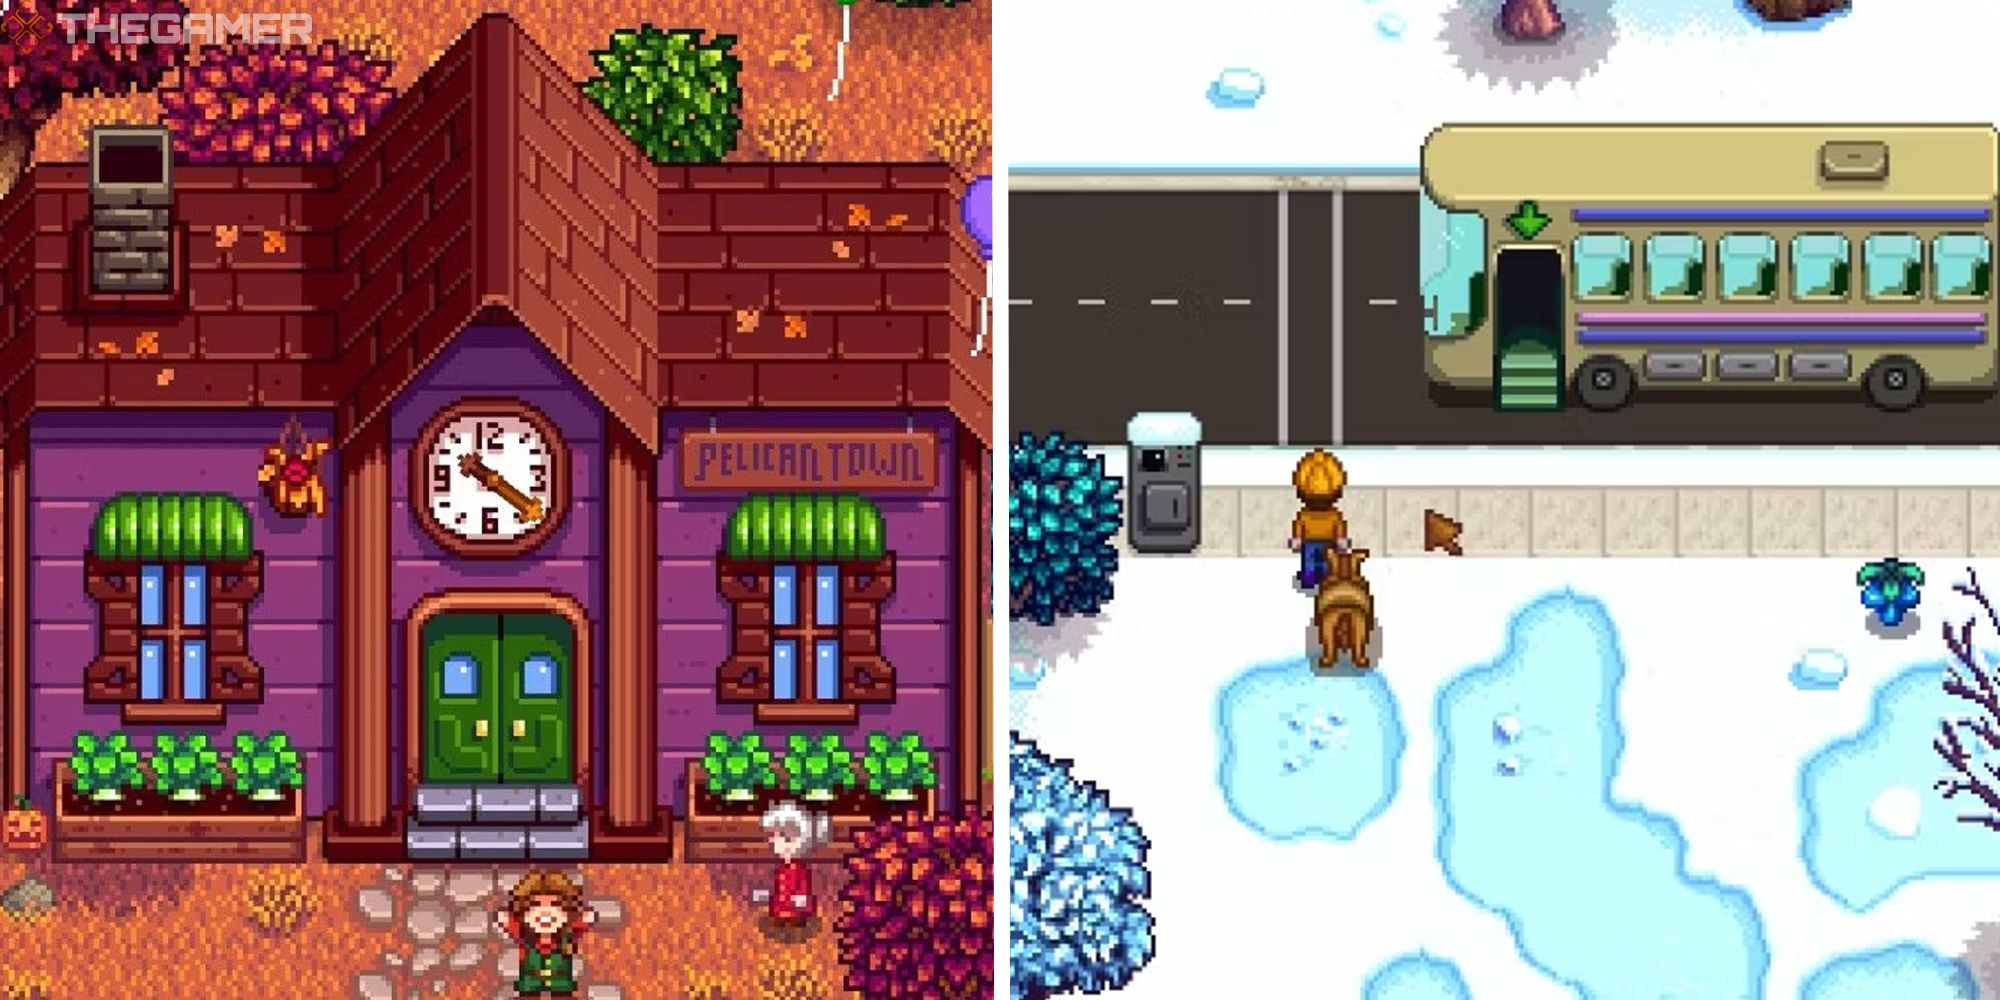 stardew valley split image showing community center completed next to image of player and horse at bus stop